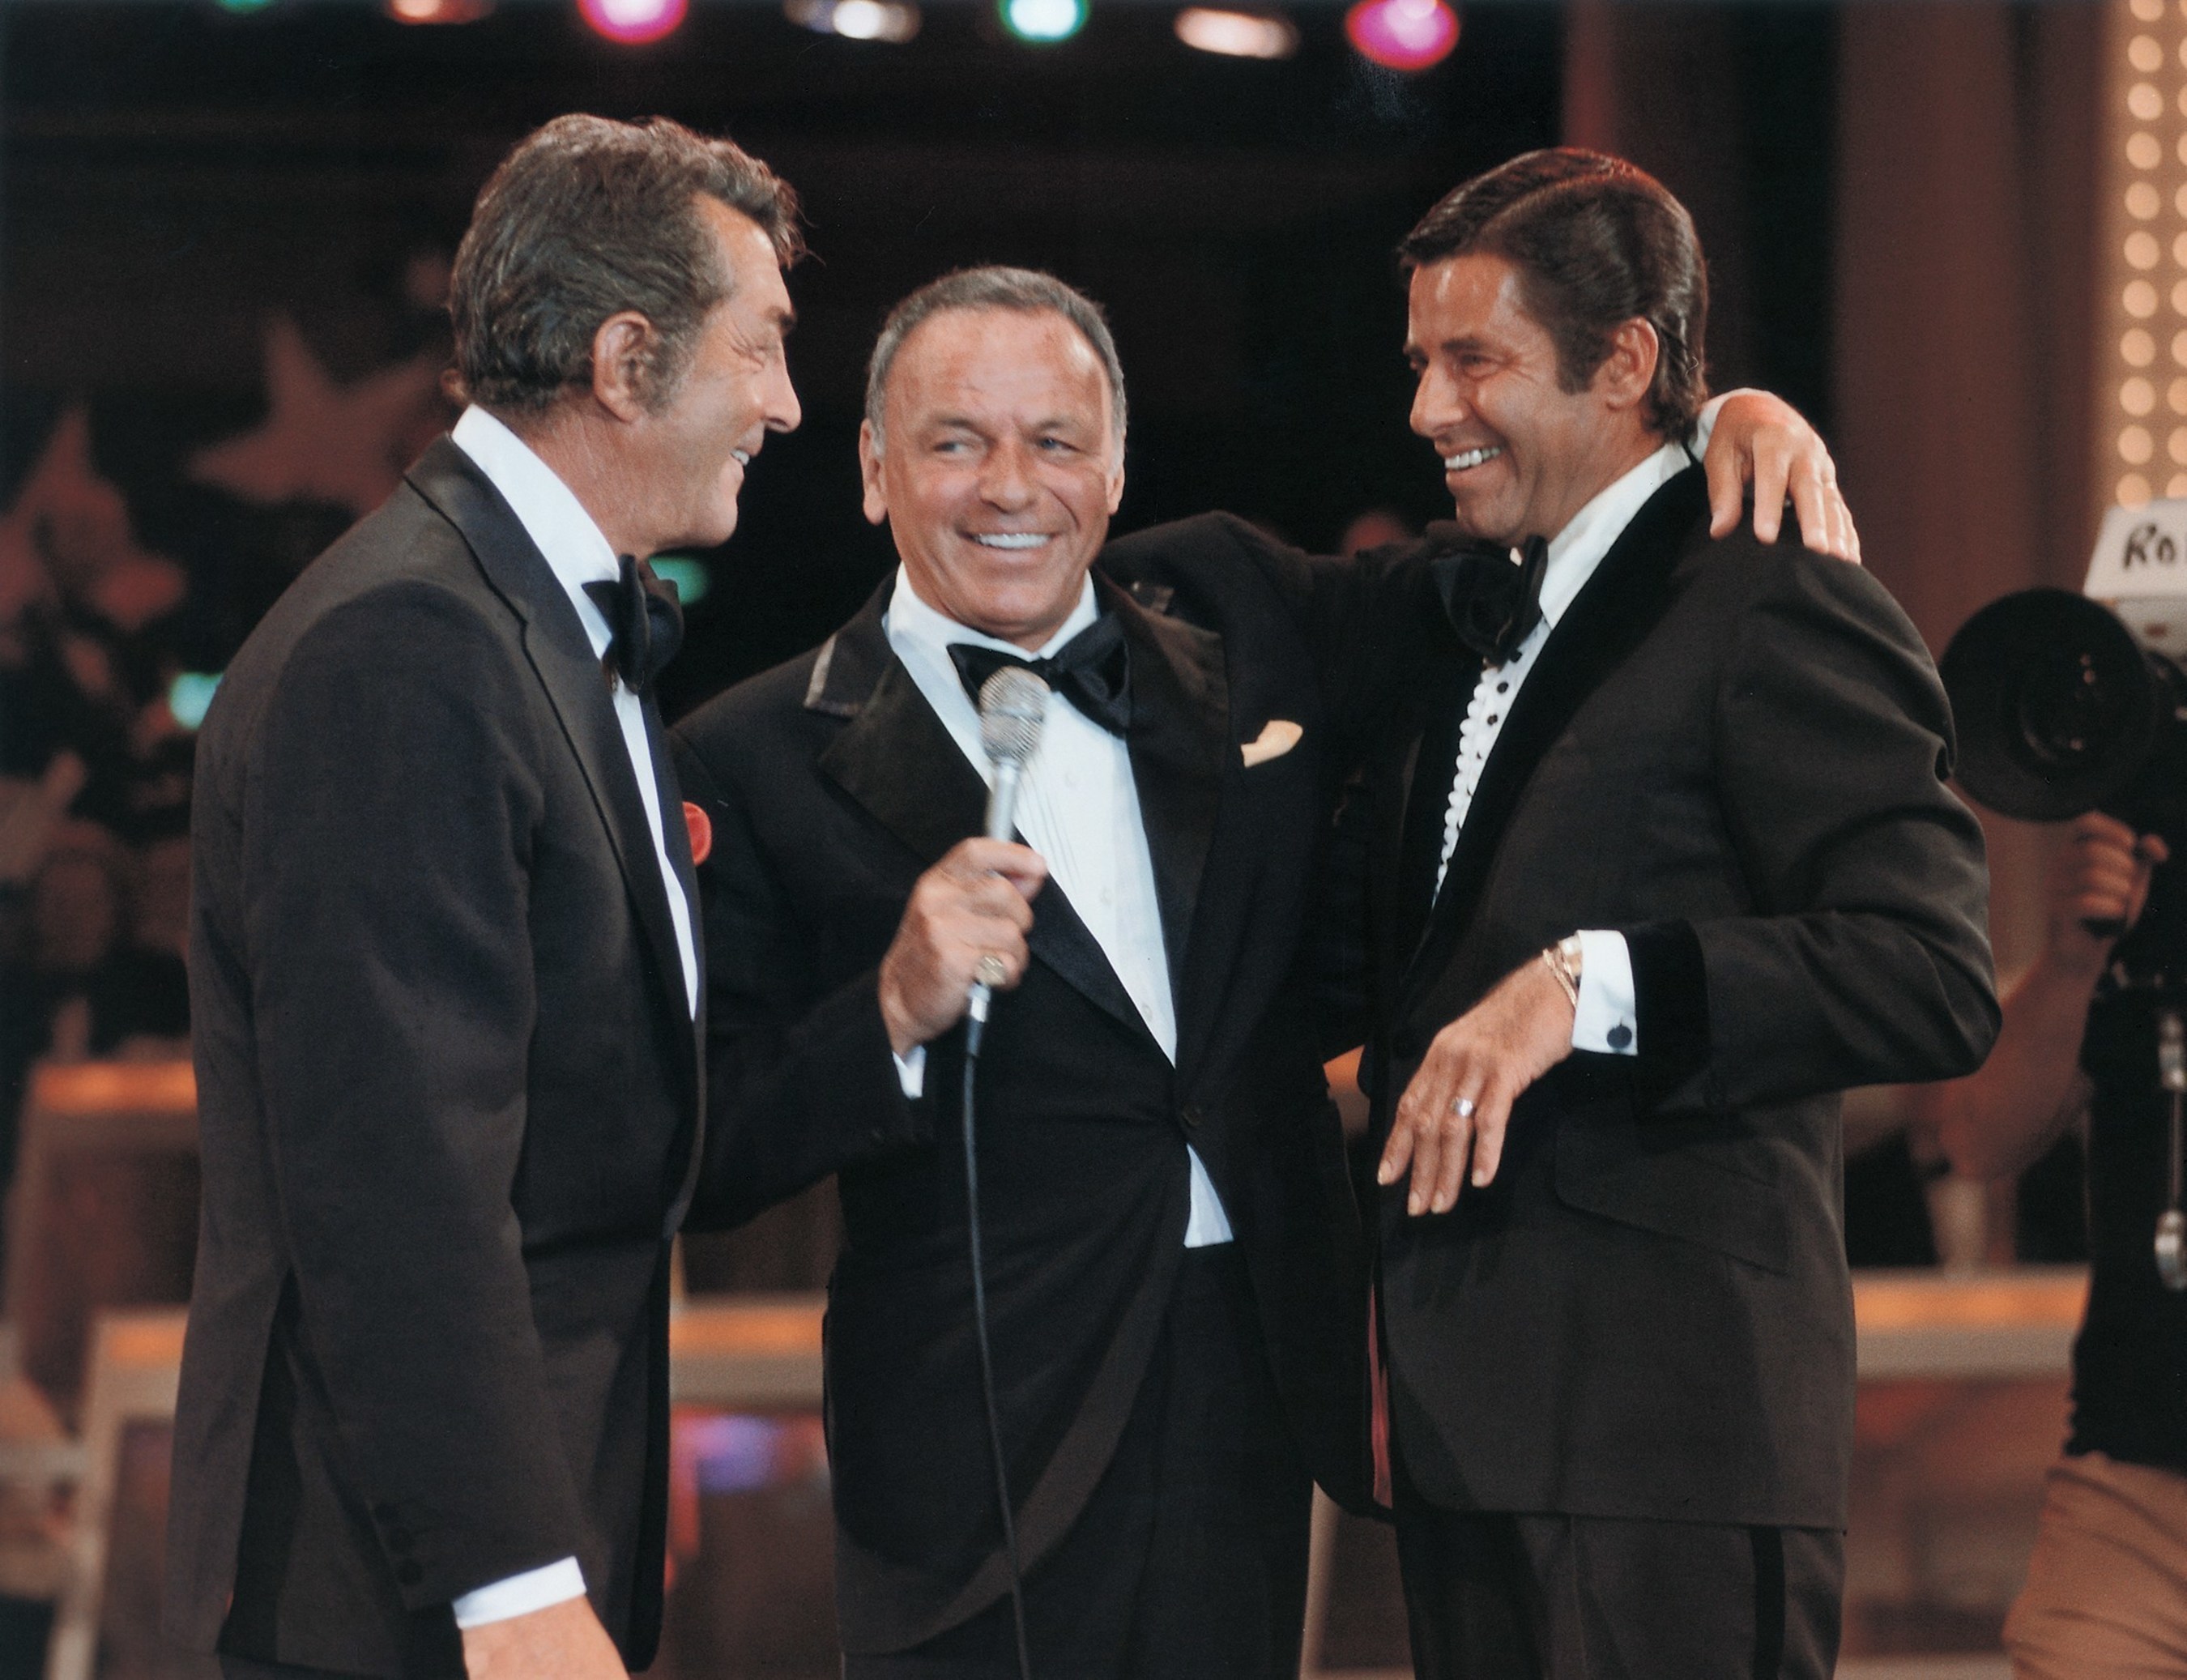 Frank Sinatra orchestrated one of the most surprising and touching moments in television history when he reunited estranged partners Dean Martin and Jerry Lewis on the 1976 Telethon.